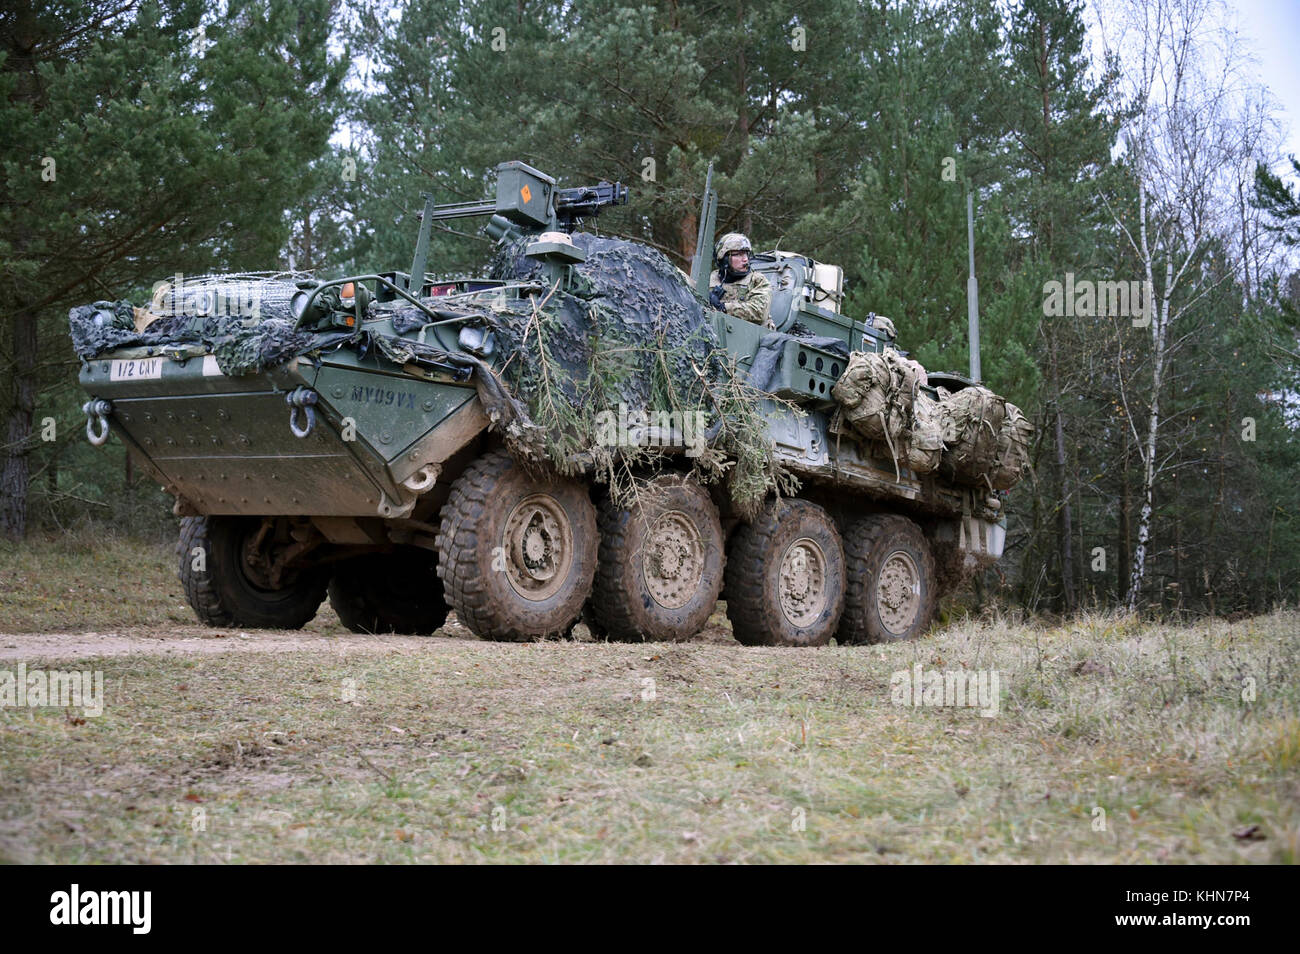 U.S. Soldiers with 1st Squadron, 2nd Cavalry Regiment move their Stryker armored vehicle during Exercise Allied Spirit VII at the 7th Army Training Command’s Hohenfels Training Area, Germany, Nov. 16, 2017. Approximately 4,050 service members from 13 nations are participating in the exercise from Oct. 30 to Nov. 22, 2017. Allied Spirit is a U.S. Army Europe-directed, 7ATC-conducted multinational exercise series designed to develop and enhance NATO and key partner’s interoperability and readiness. (U.S. Army photo by Gertrud Zach) Stock Photo